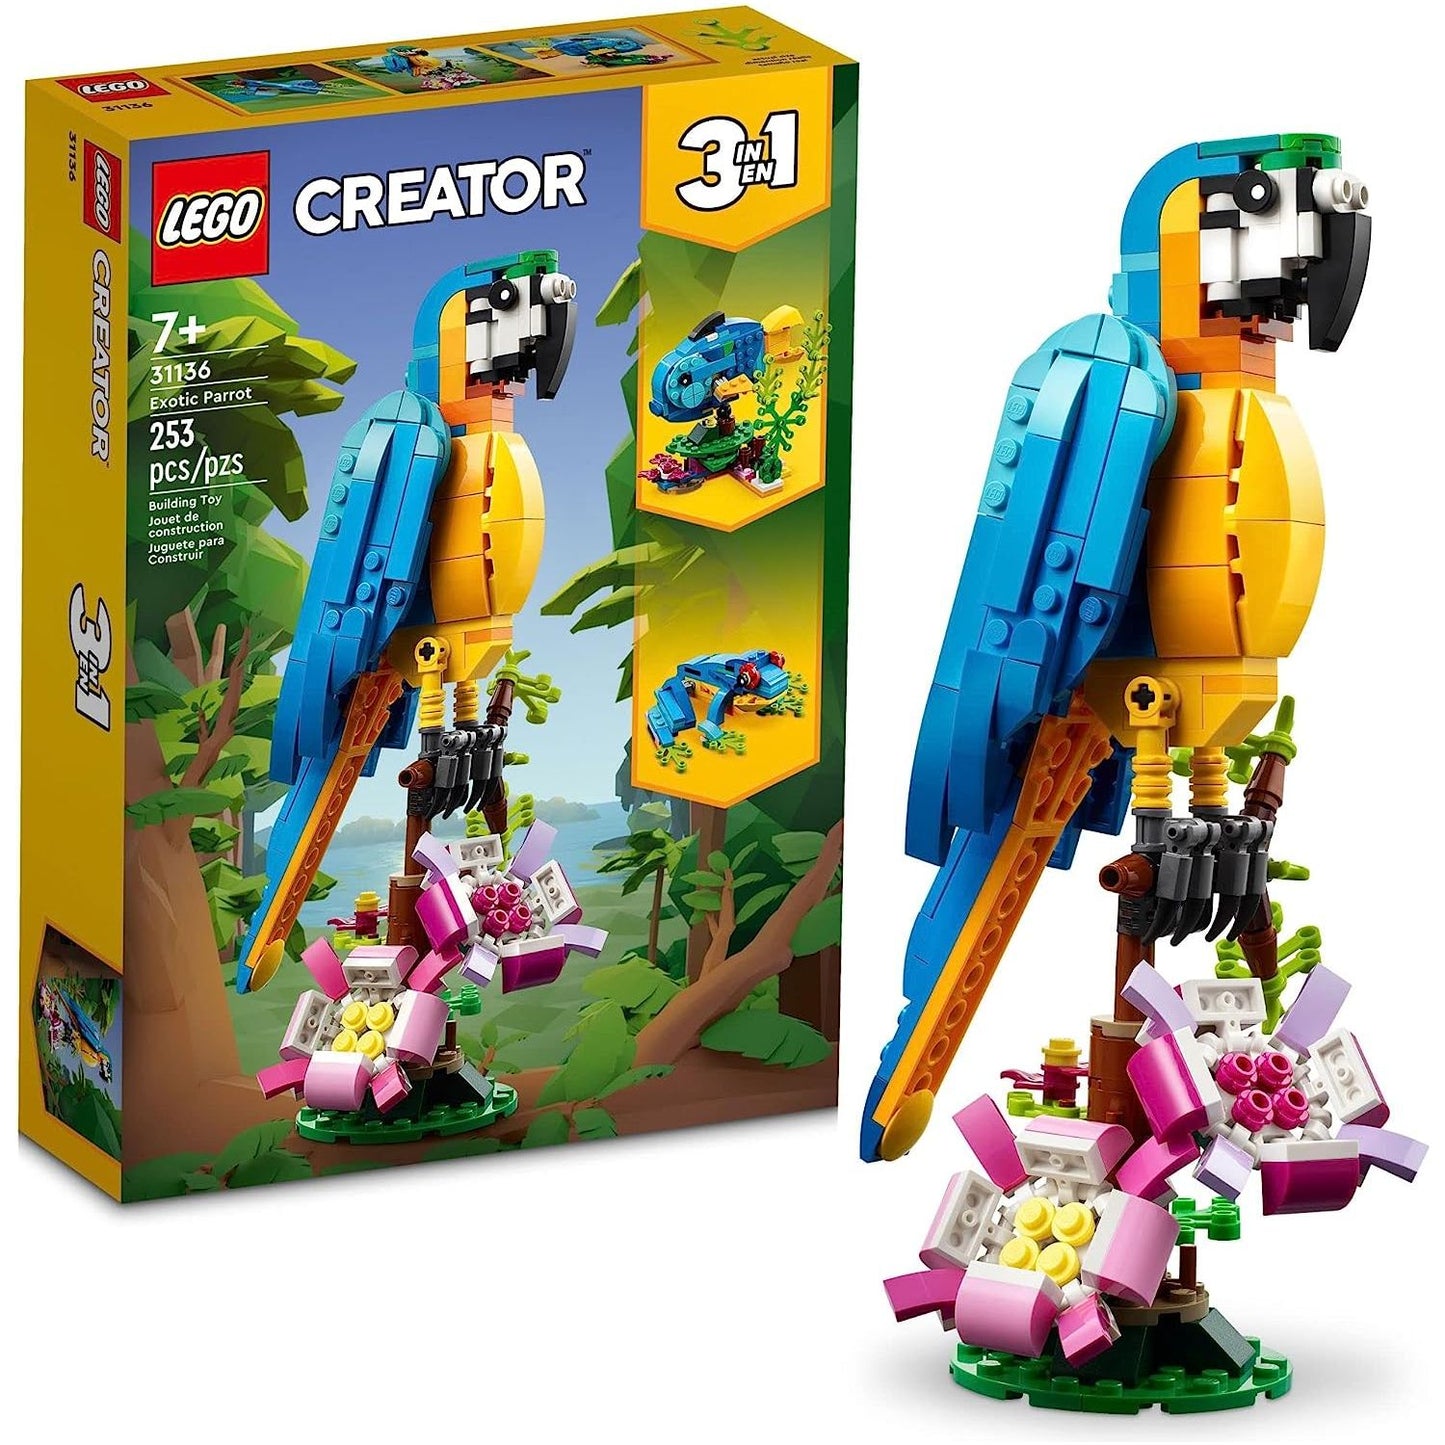 LEGO Creator 3 in 1 Exotic Parrot Building Toy Set, Transforms to 3 Different Animal Figures - from Colorful Parrot, to Swimming Fish, to Cute Frog, Creative Toys for Kids Ages 7 and Up, 31136